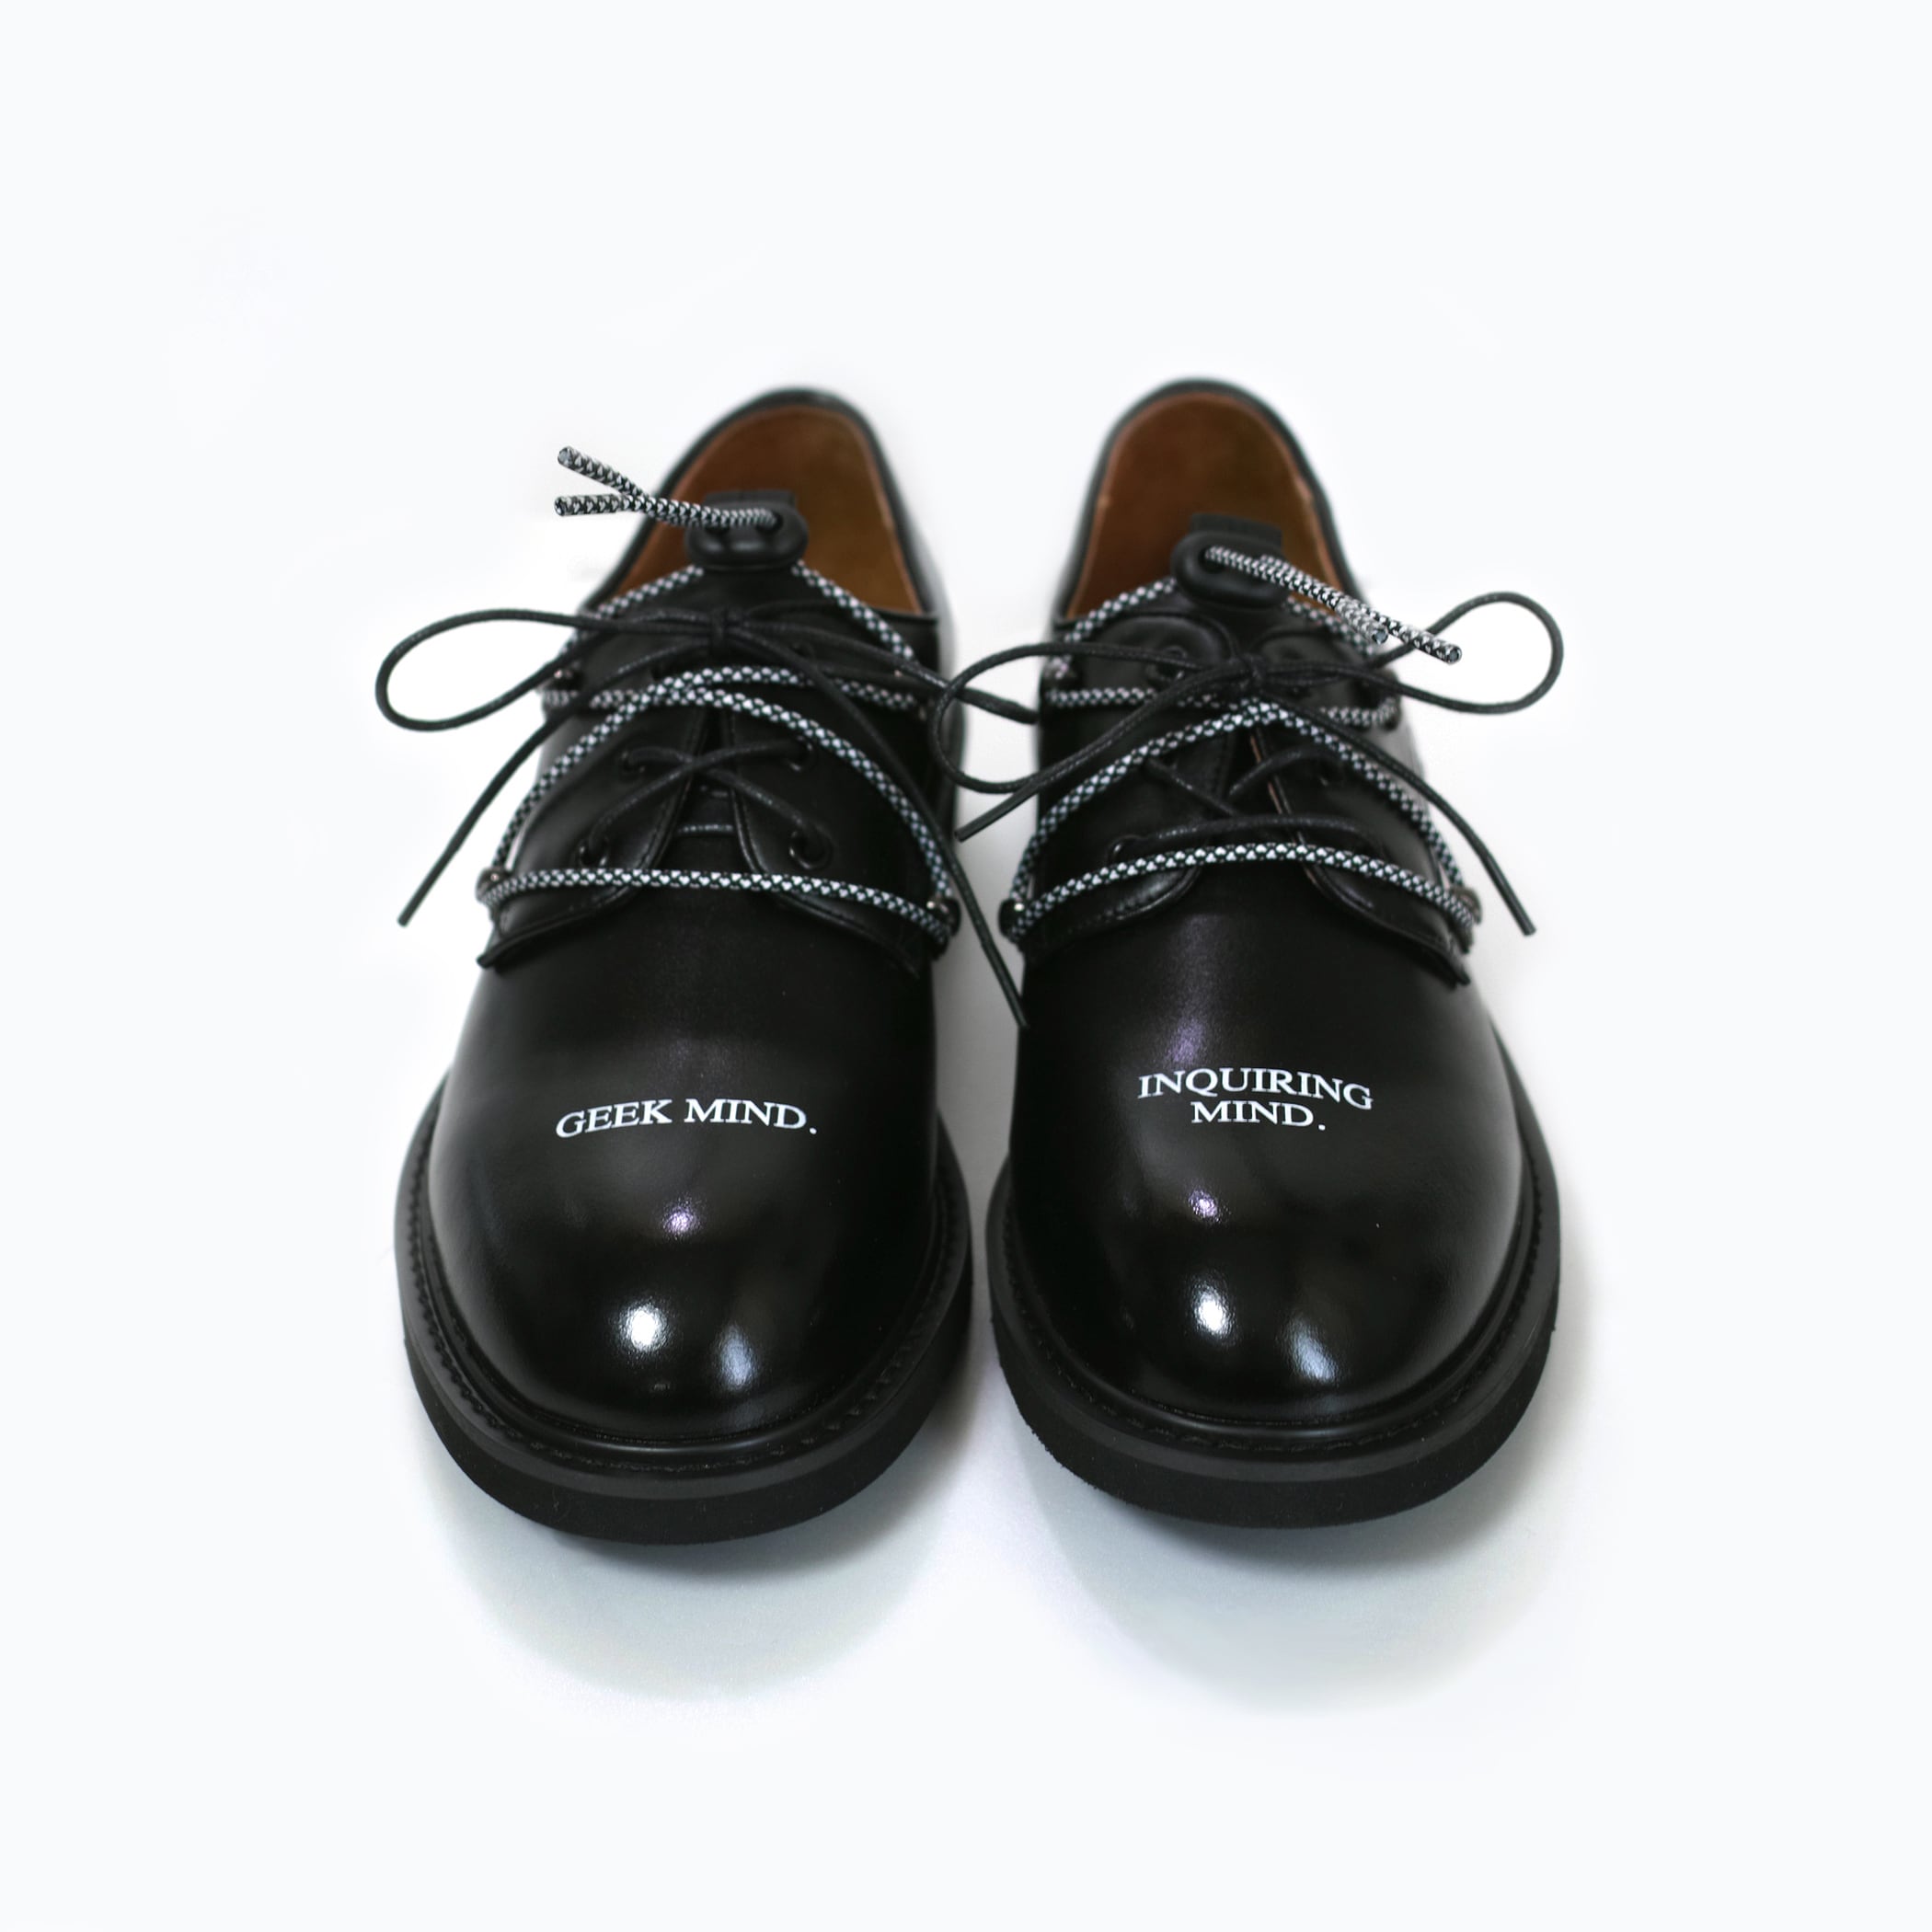 "TREKKING and DRESS" CUSTOM LEATHER SHOES BLACK